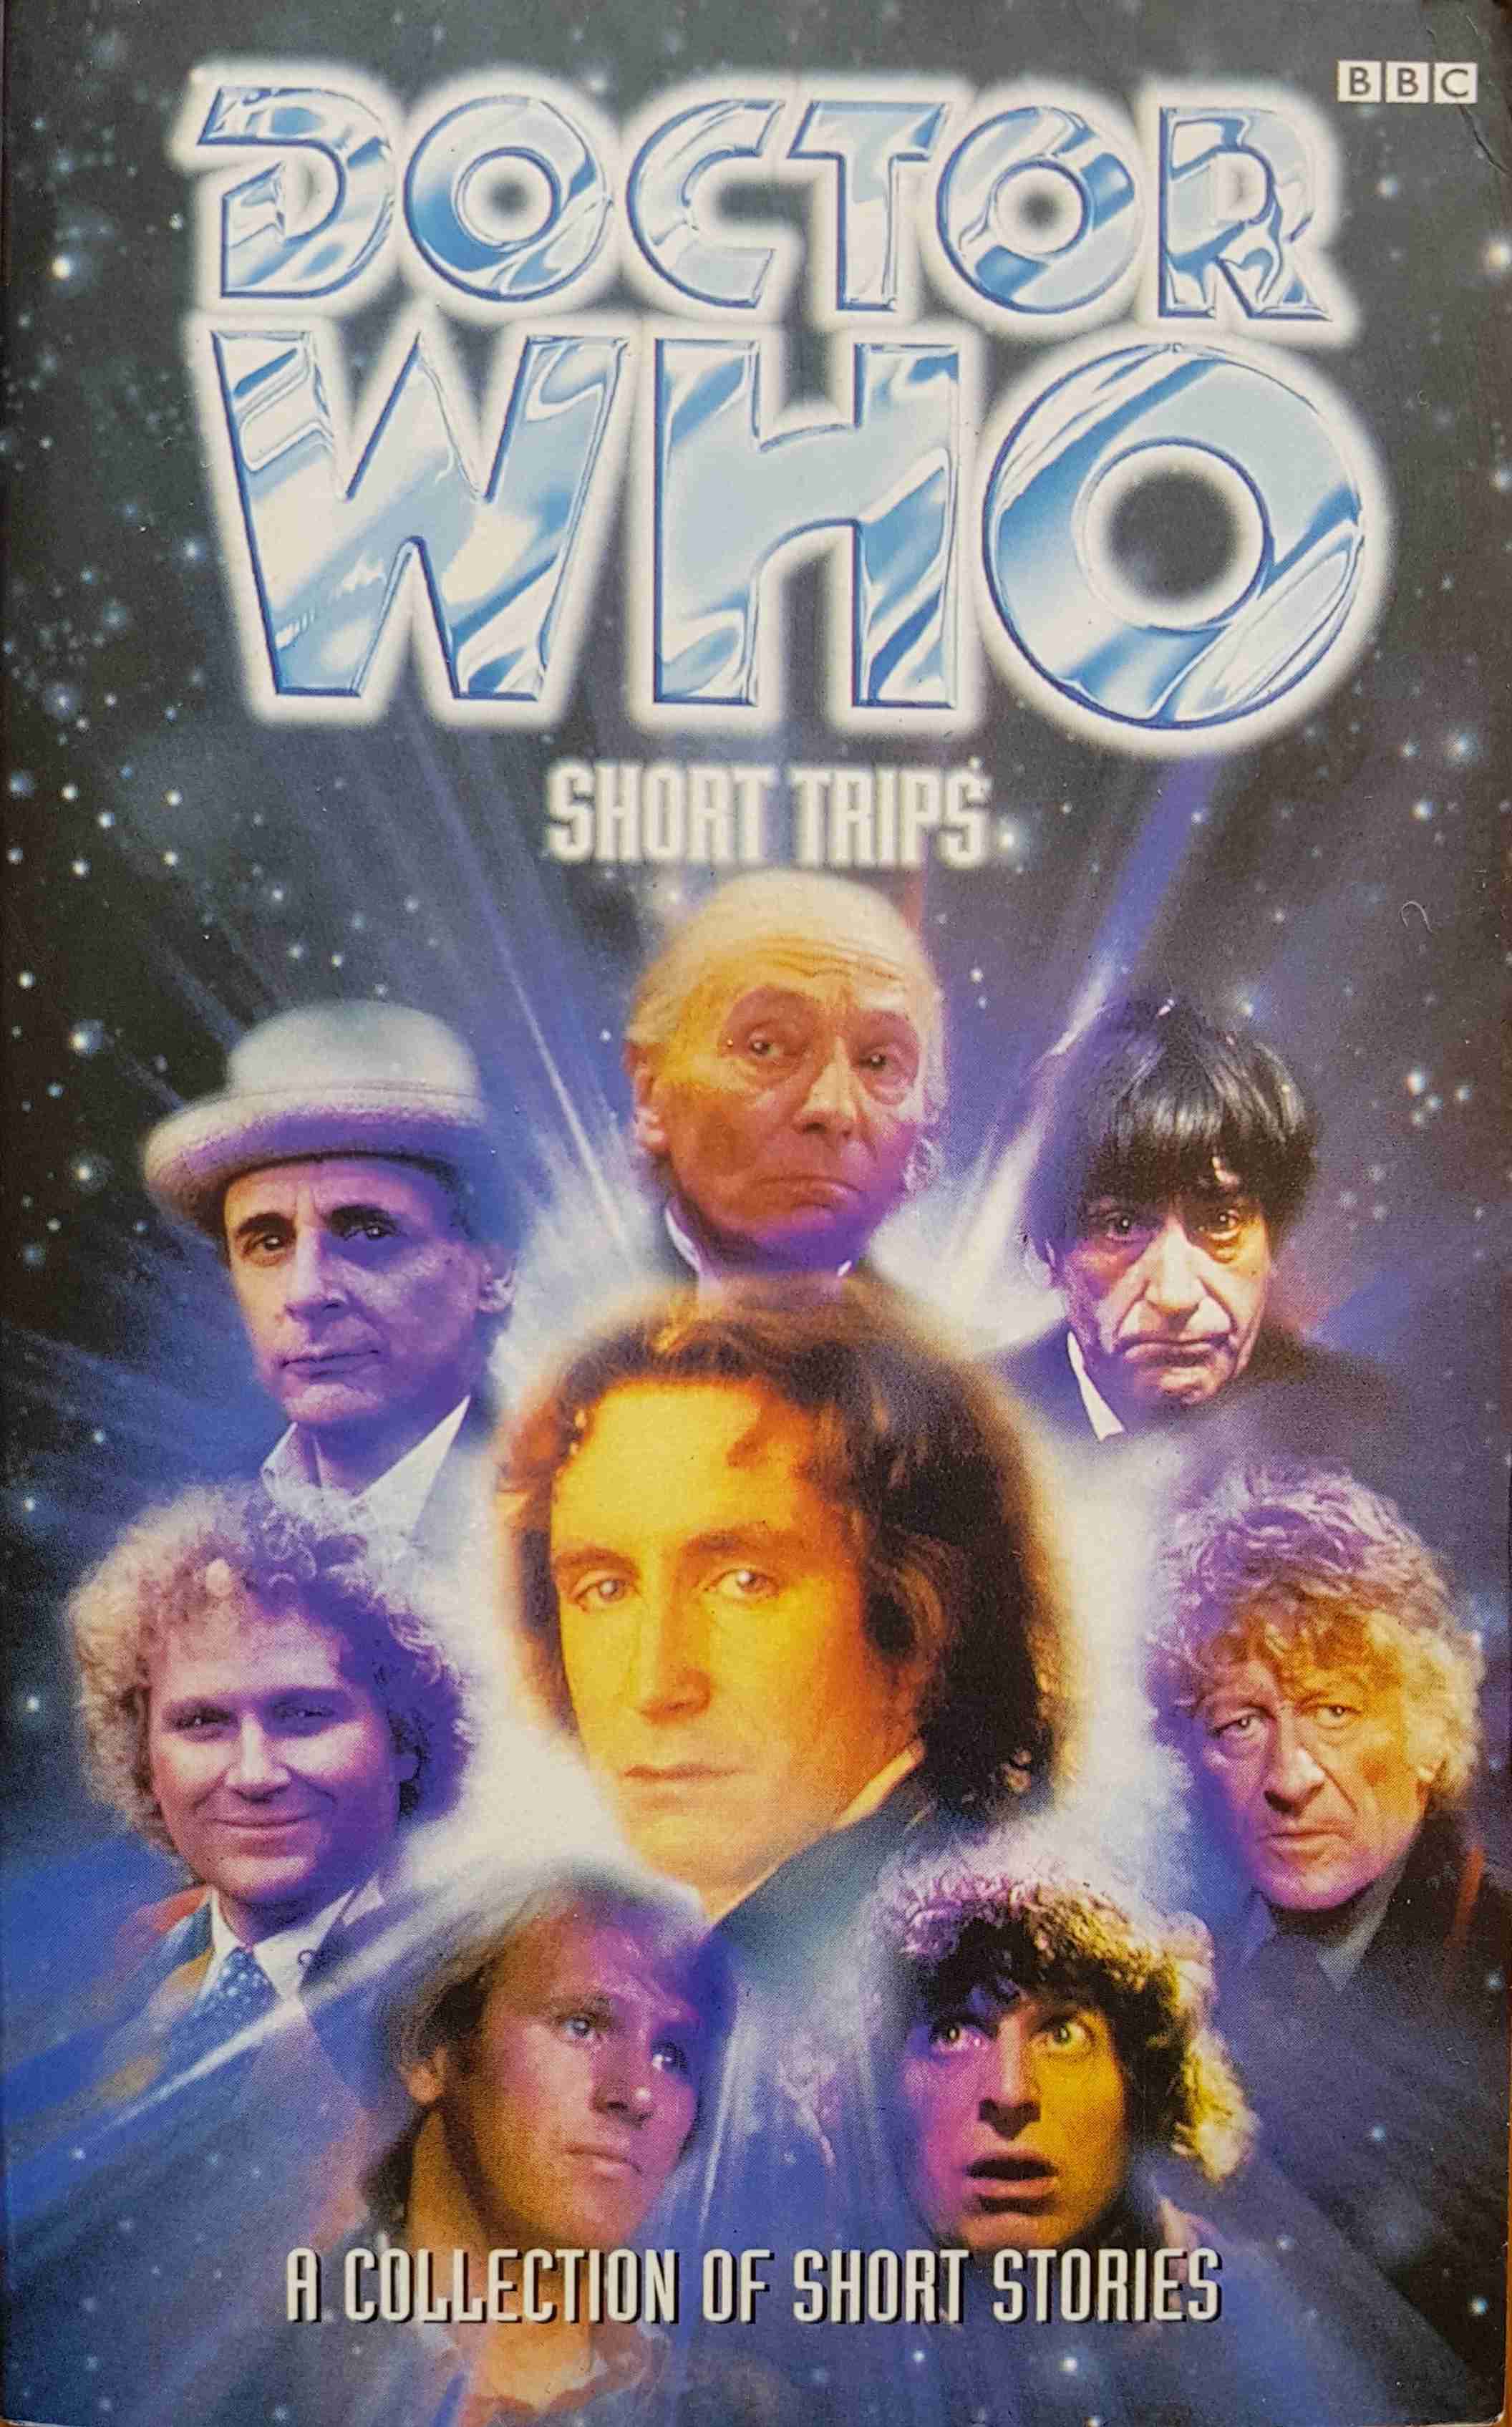 Picture of Doctor Who - Short trips by artist Various from the BBC books - Records and Tapes library